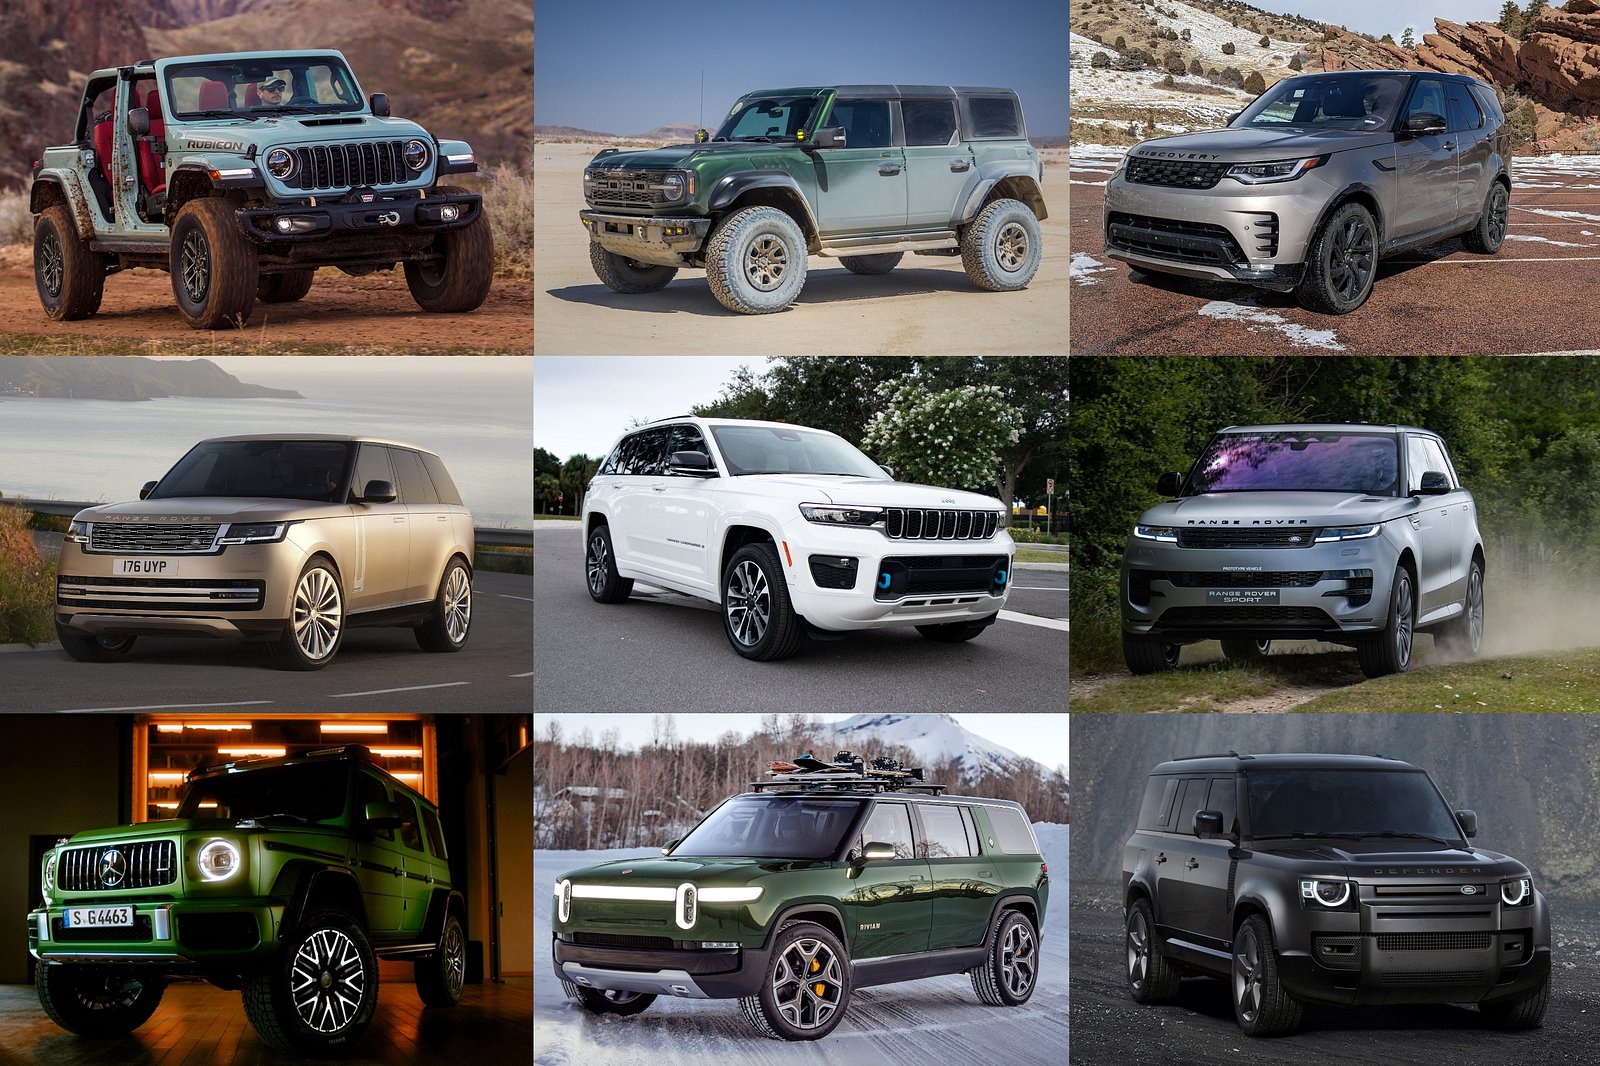 The Top 10 Off-Road Vehicles for Conquering Any Terrain - Land Rover Range Rover All-Terrain Capabilities